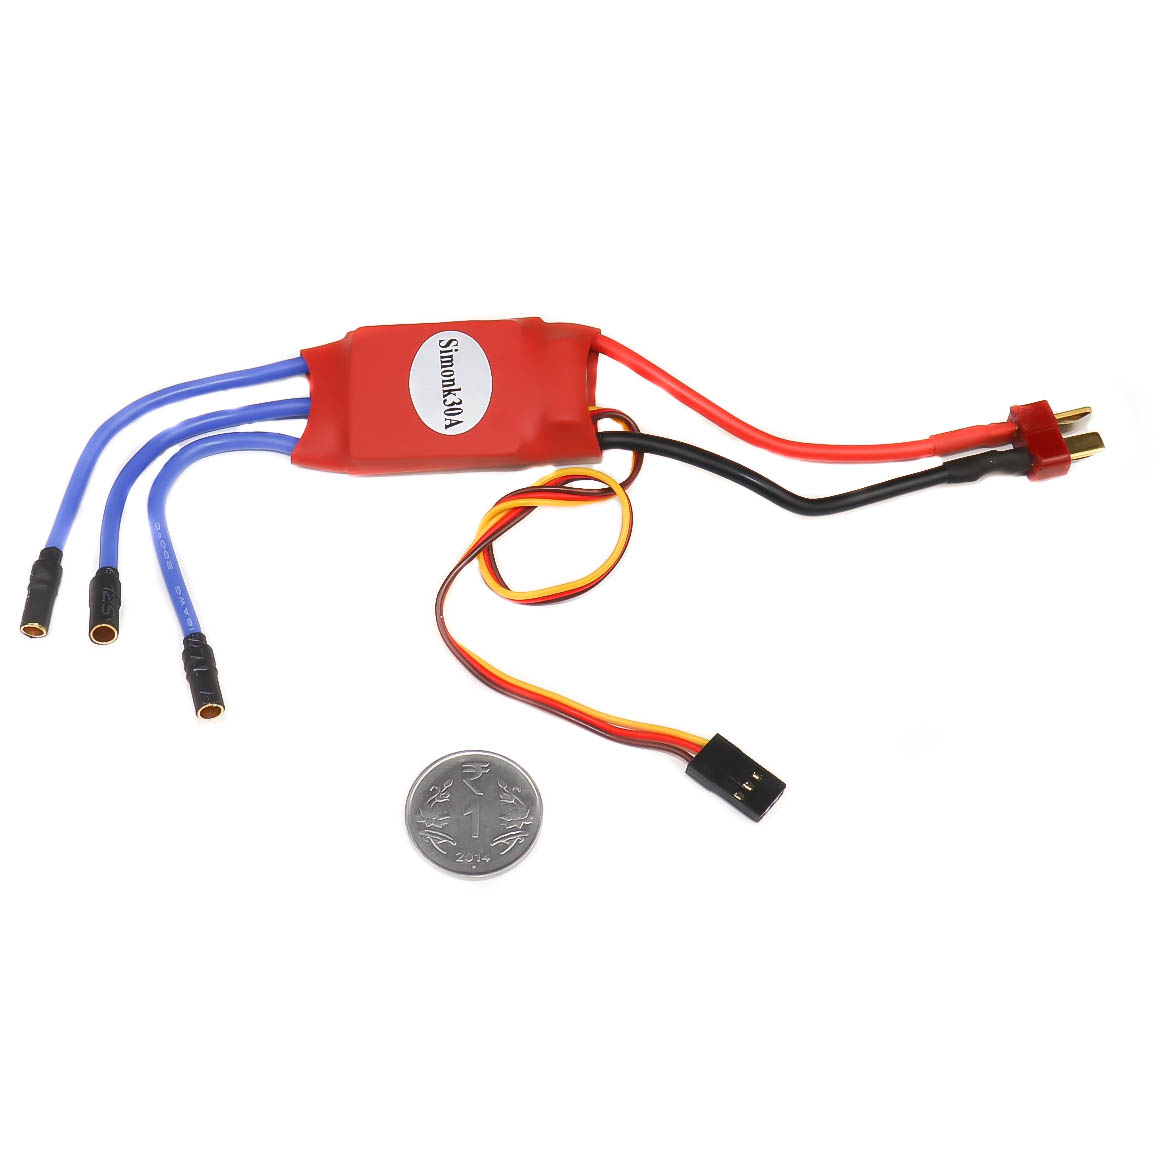 Buy SimonK 30A ESC Controller w/ Connector In India at low ...